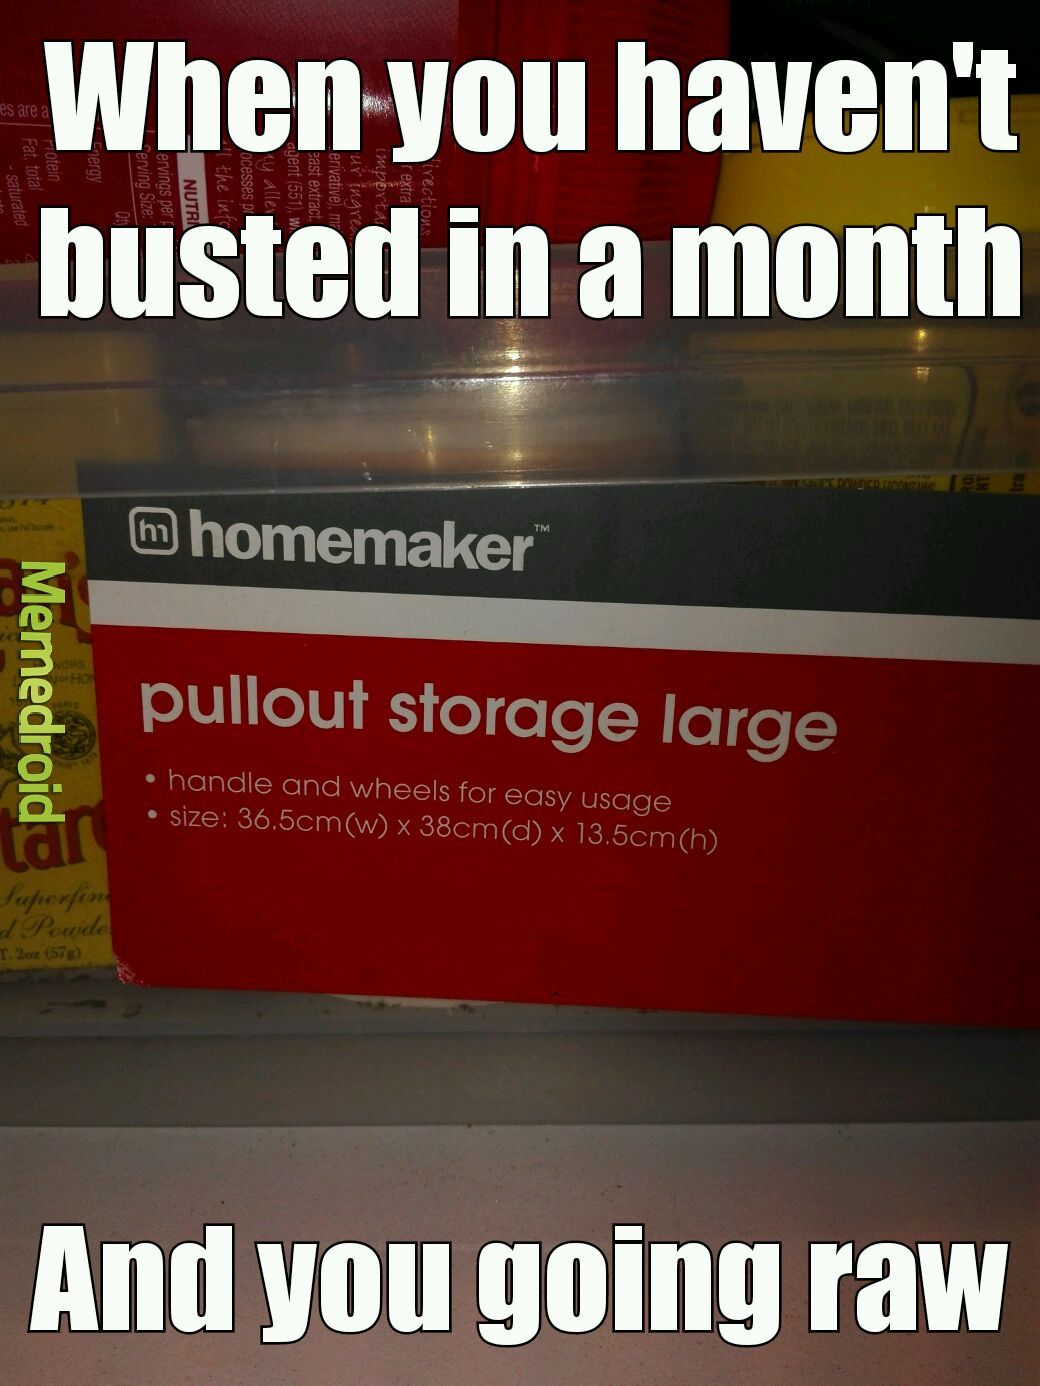 Pull out, storage large - meme